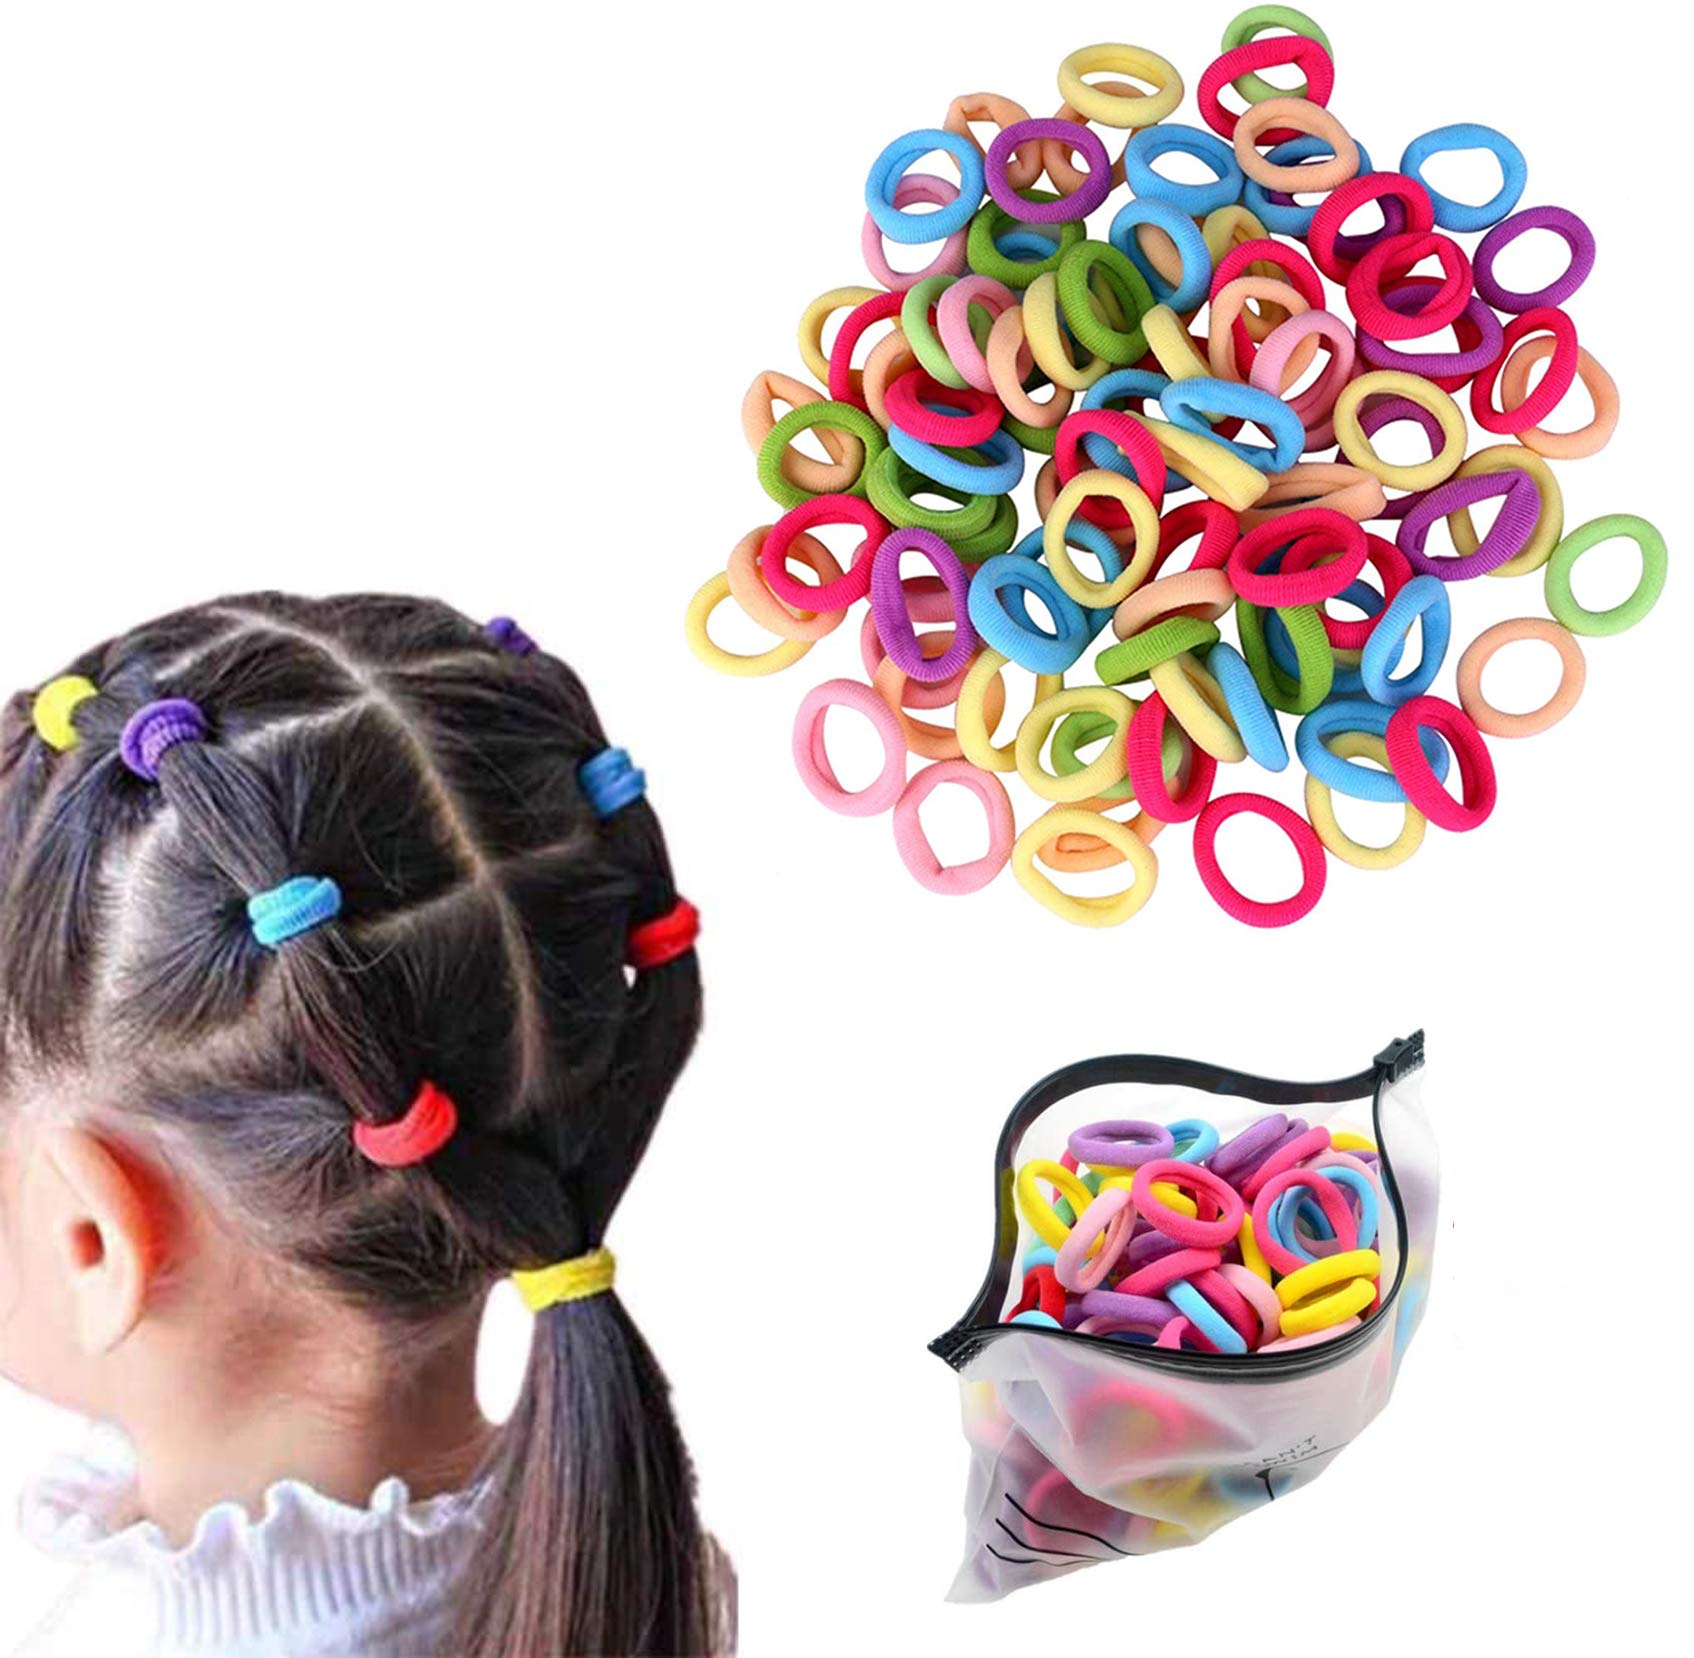 Guuyoo Clear Elastic Hair Bands, 1500X Mini Hair Rubber Bands for Girls, Soft Hair Elastics Ties for Kids, Small Clear Ponytail Elastics Holders in